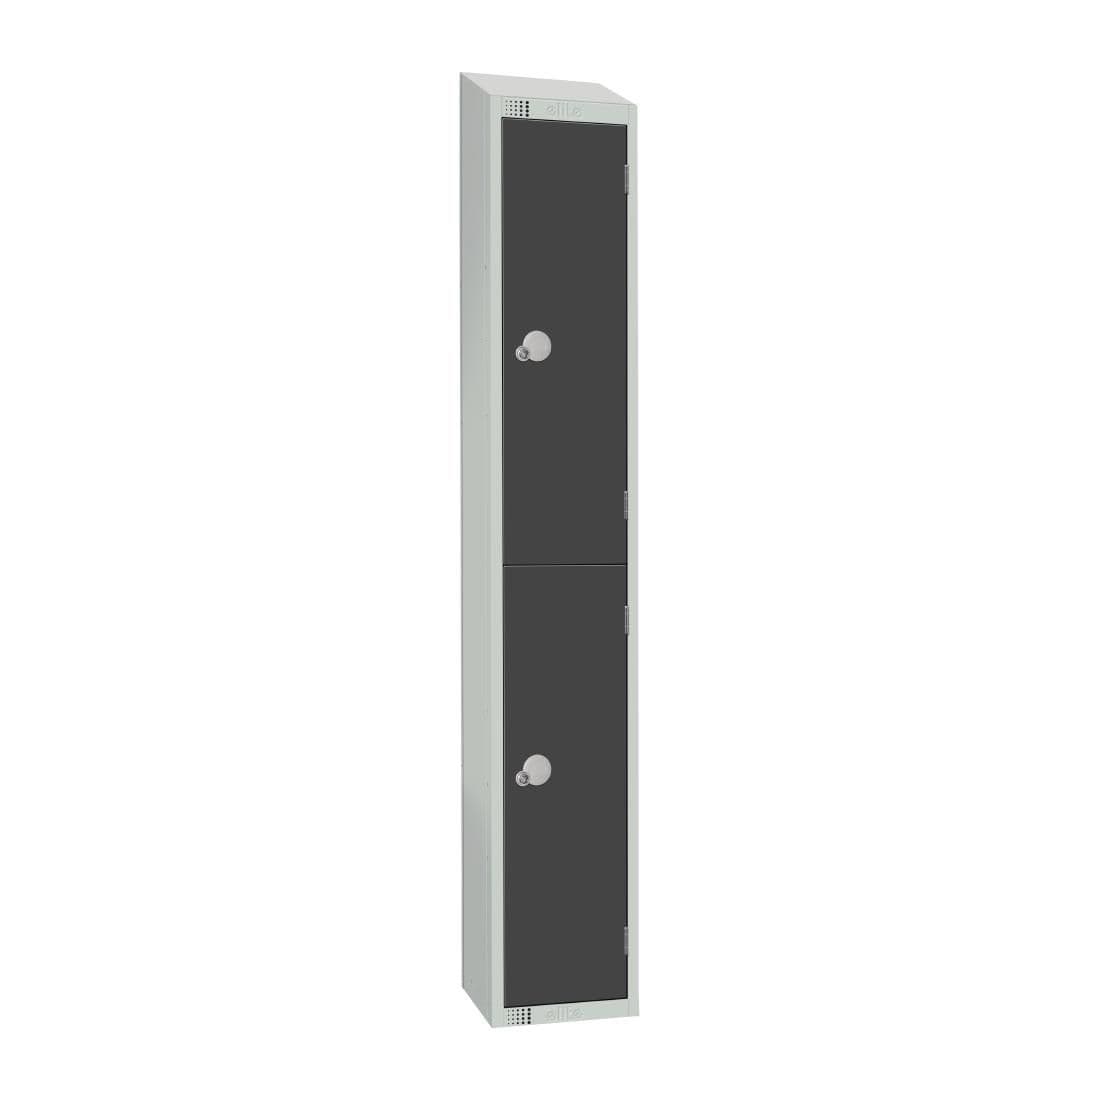 GR678-CNS Elite Double Door Coin Return Locker with Sloping Top Graphite Grey JD Catering Equipment Solutions Ltd